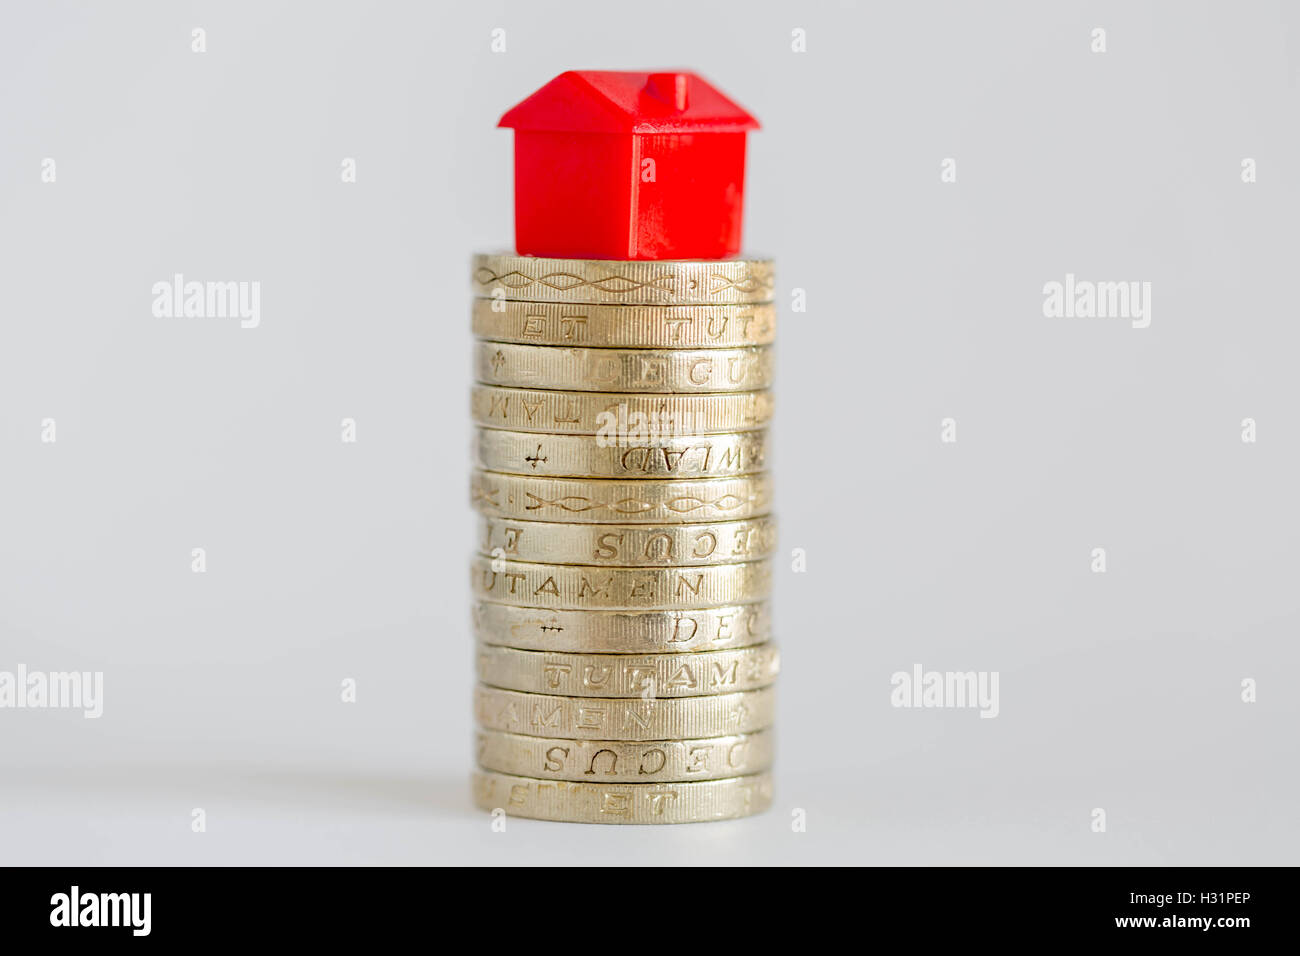 Concept image depicting housing/property markets. Stock Photo